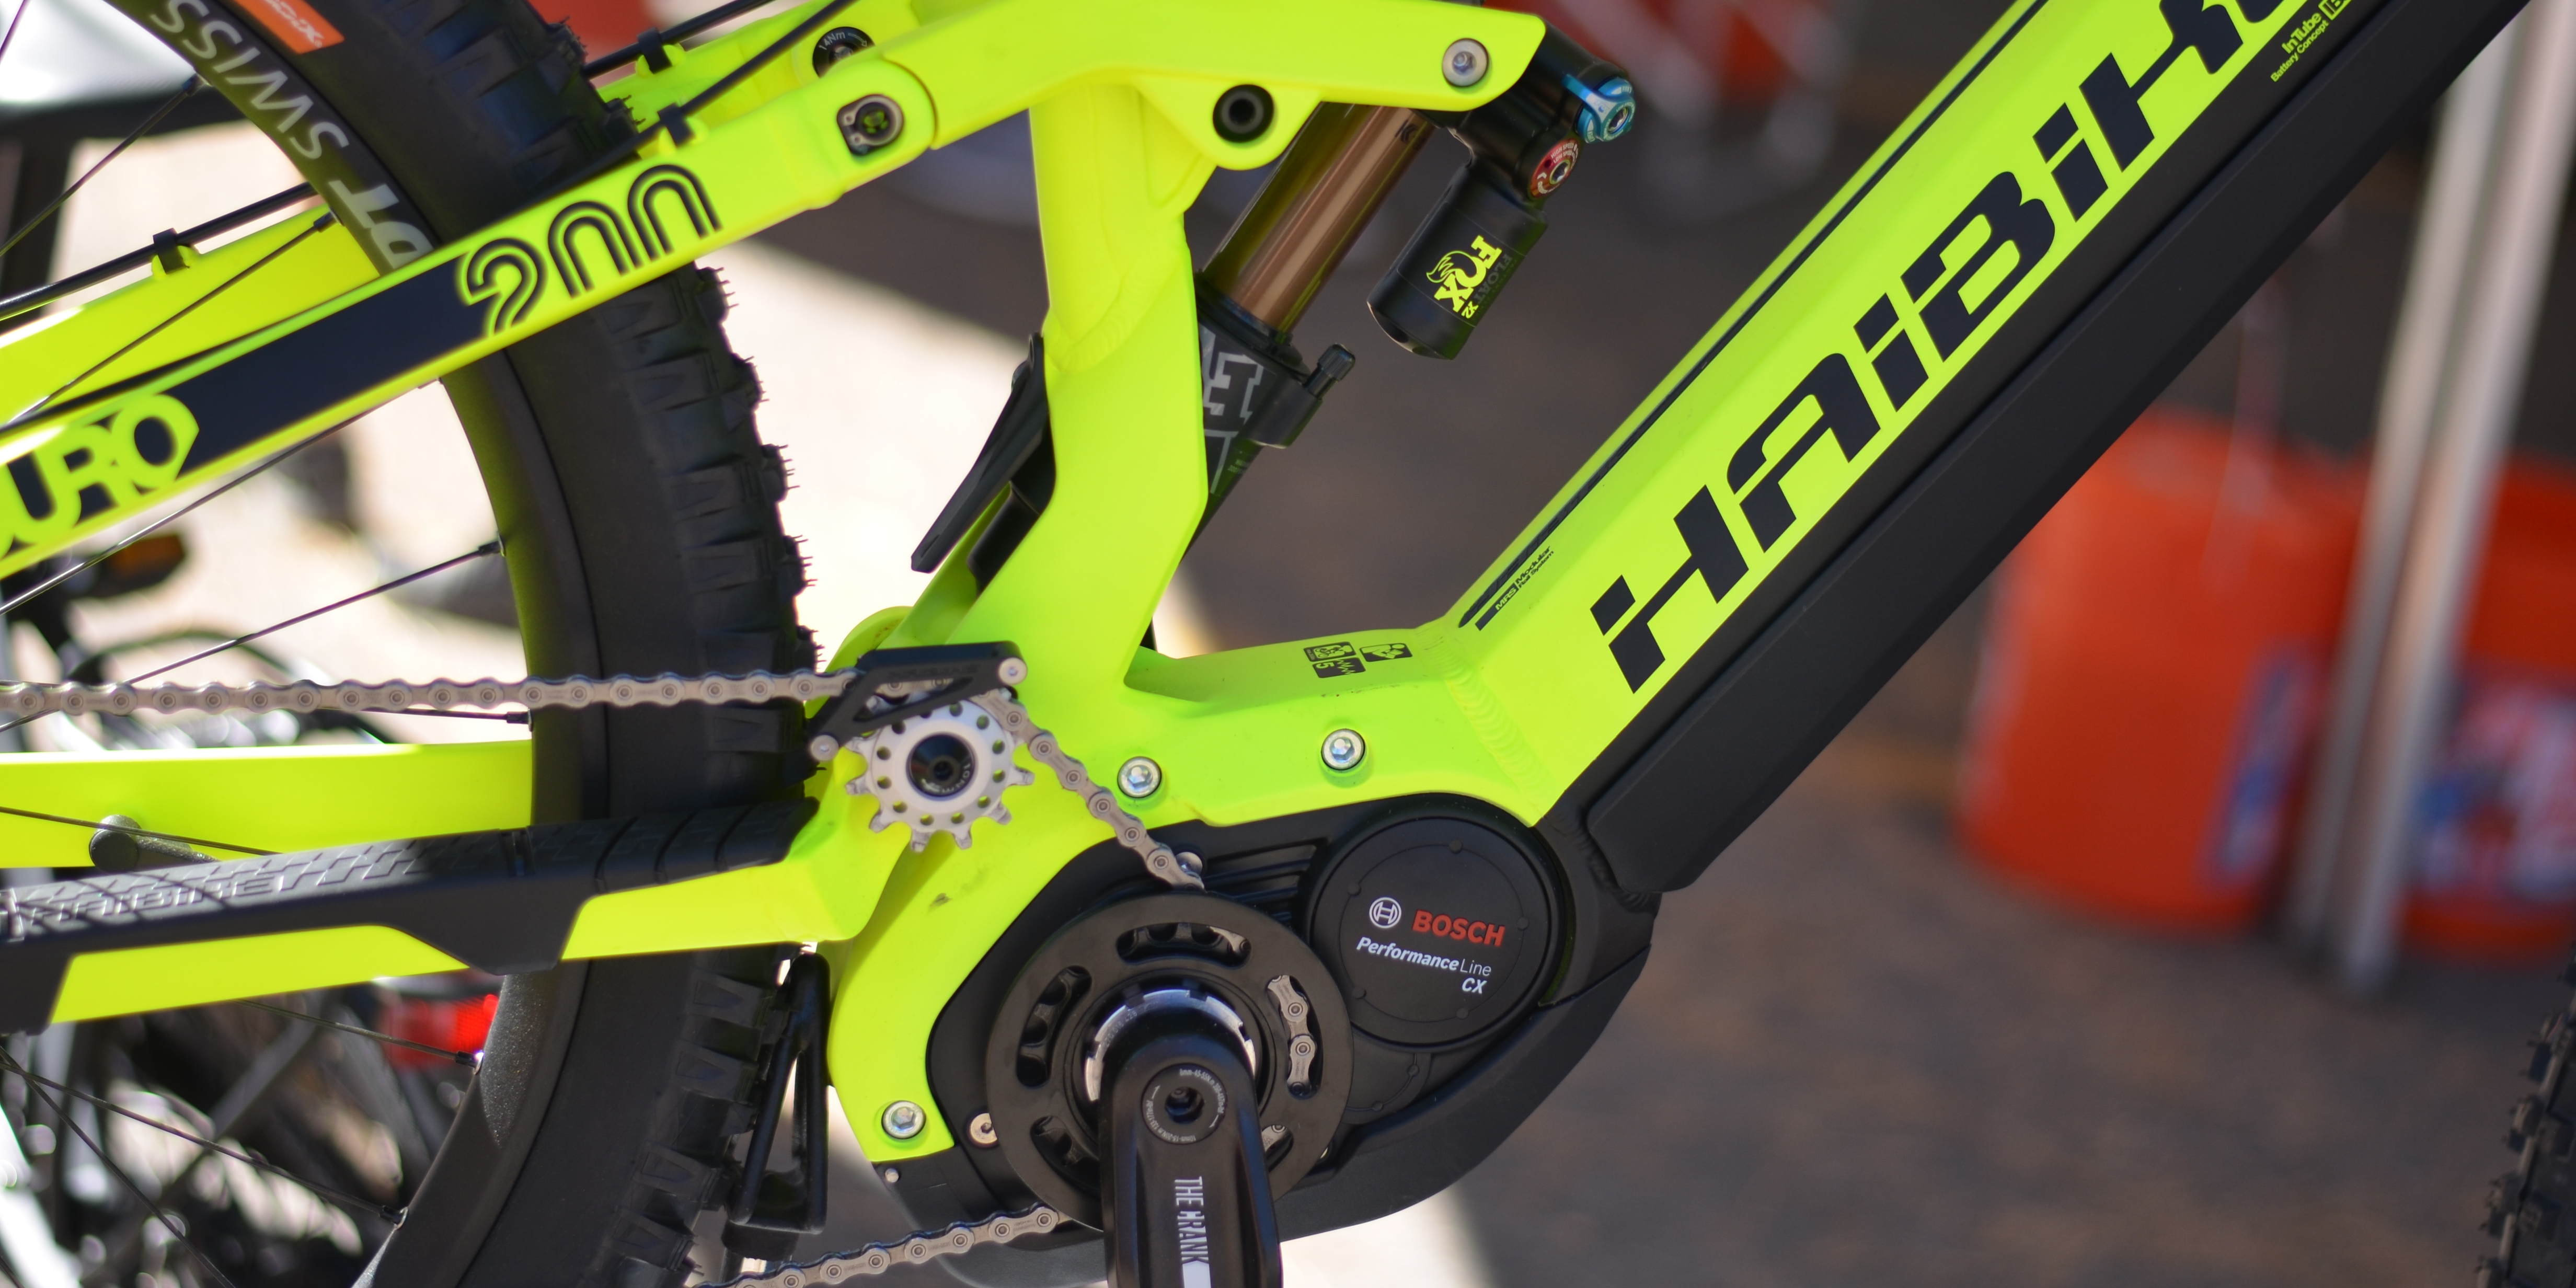 Interbike Outdoor Demo summary: off-road electric bicycle heaven